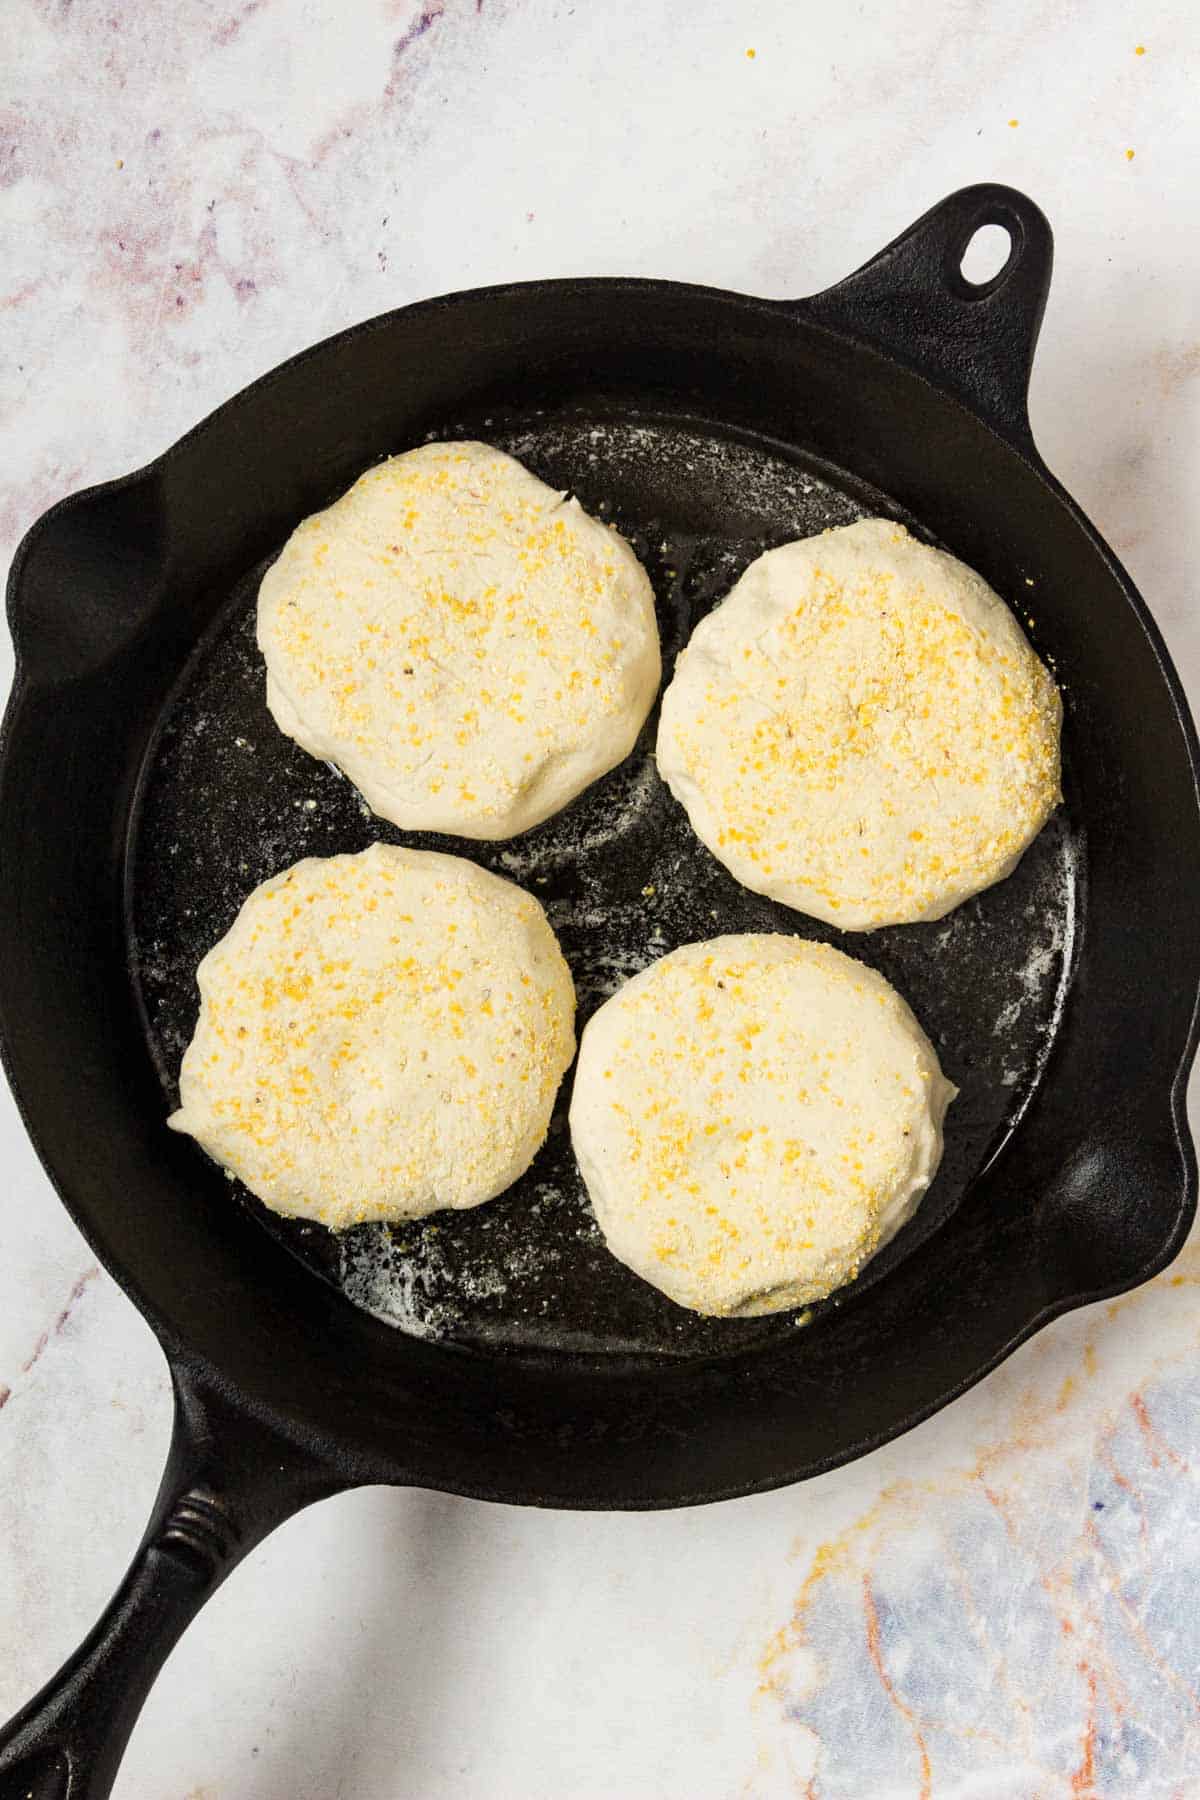 Gluten free English muffins cooking in a cast iron skillet.